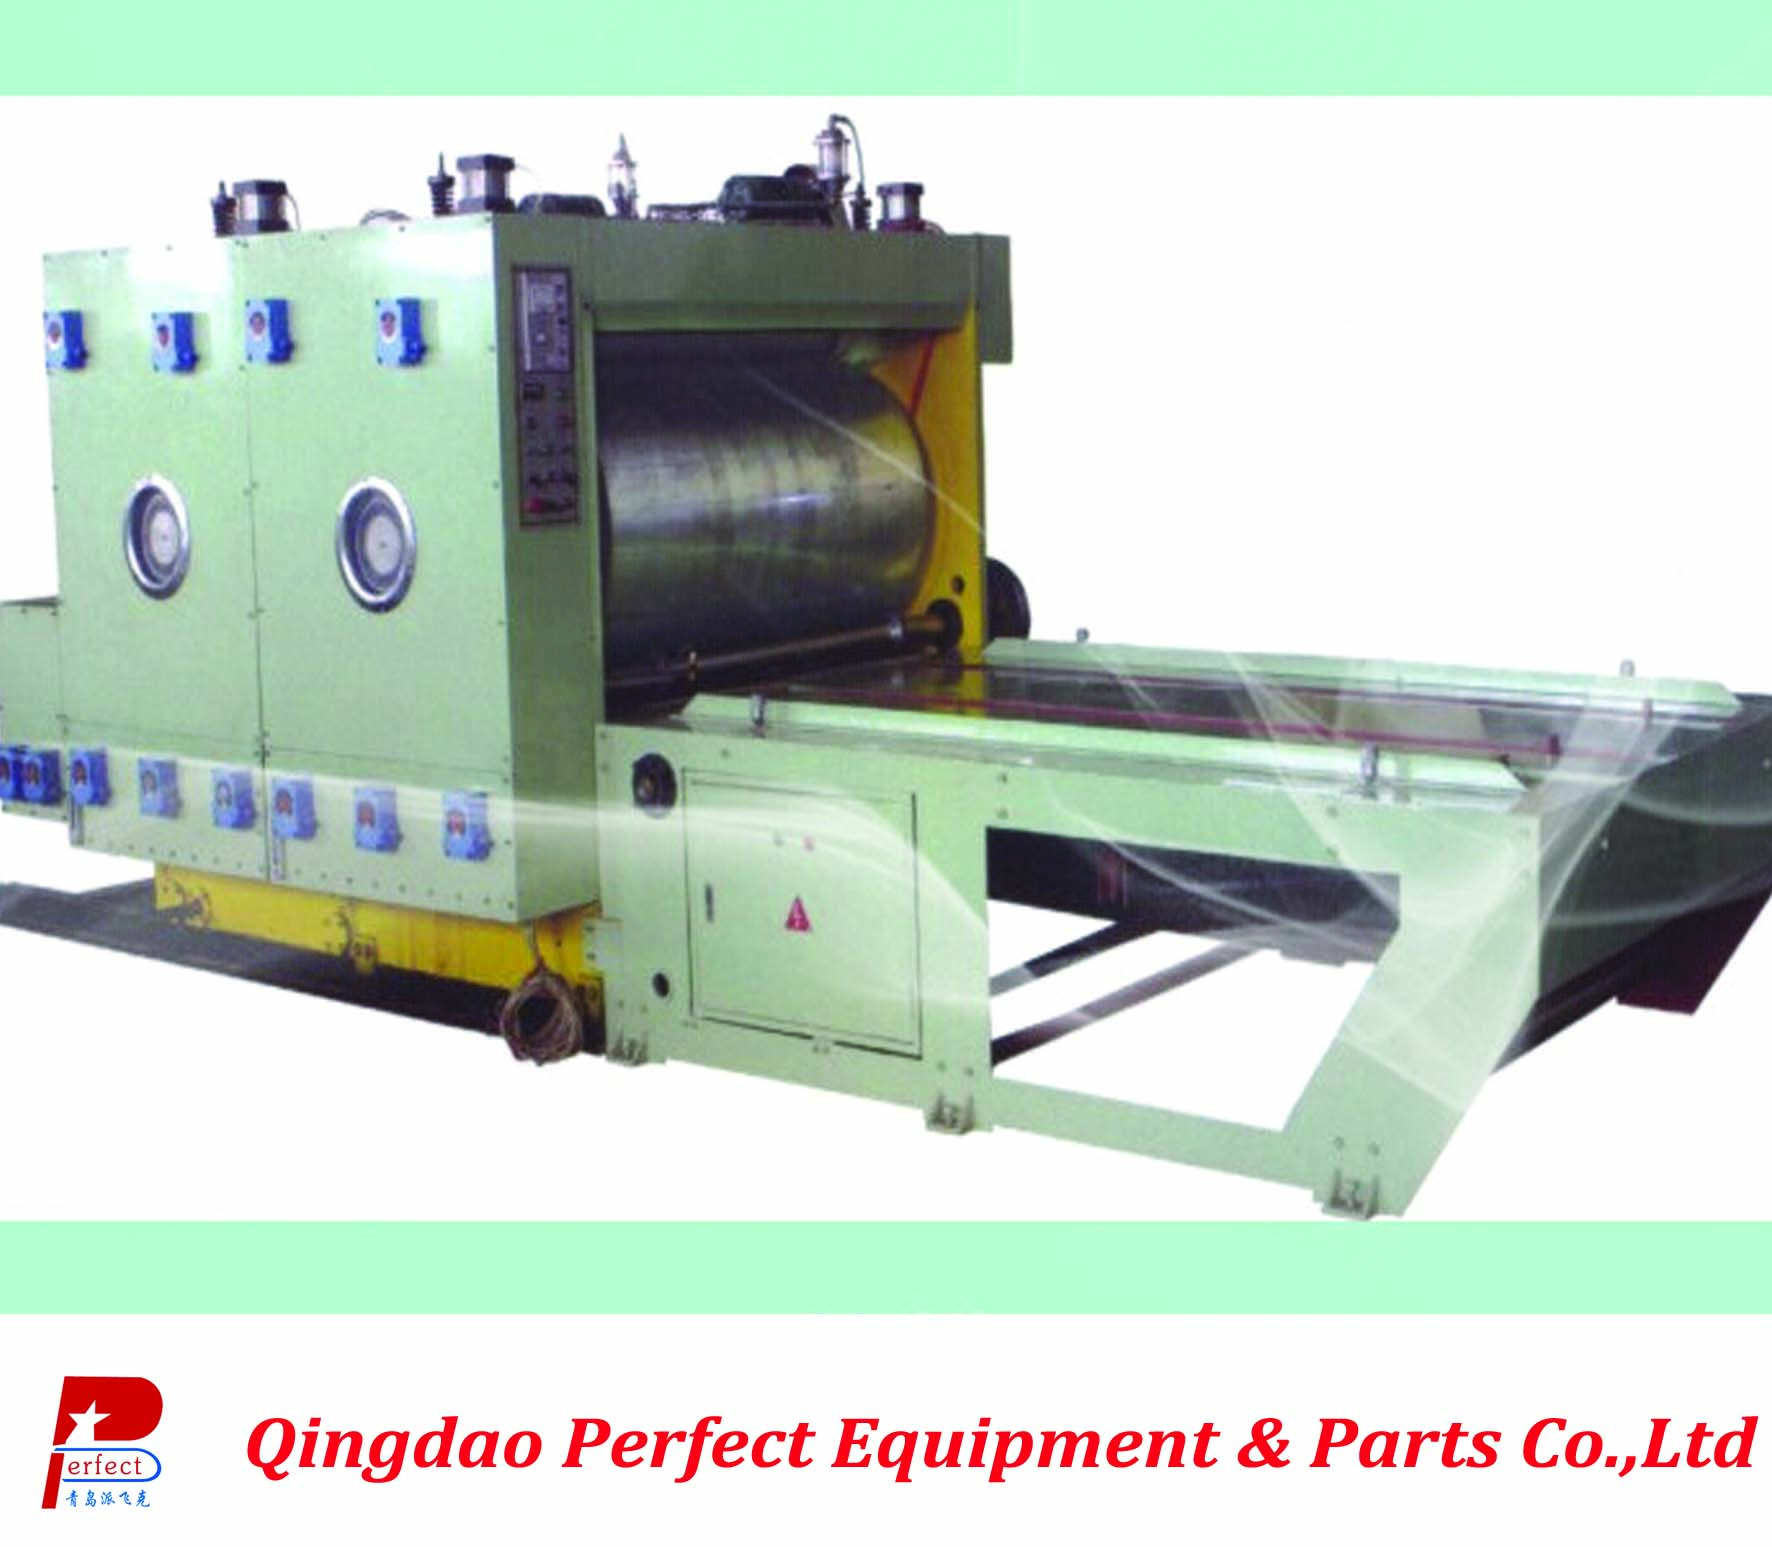 multi-function printing, cutting and grooving machine